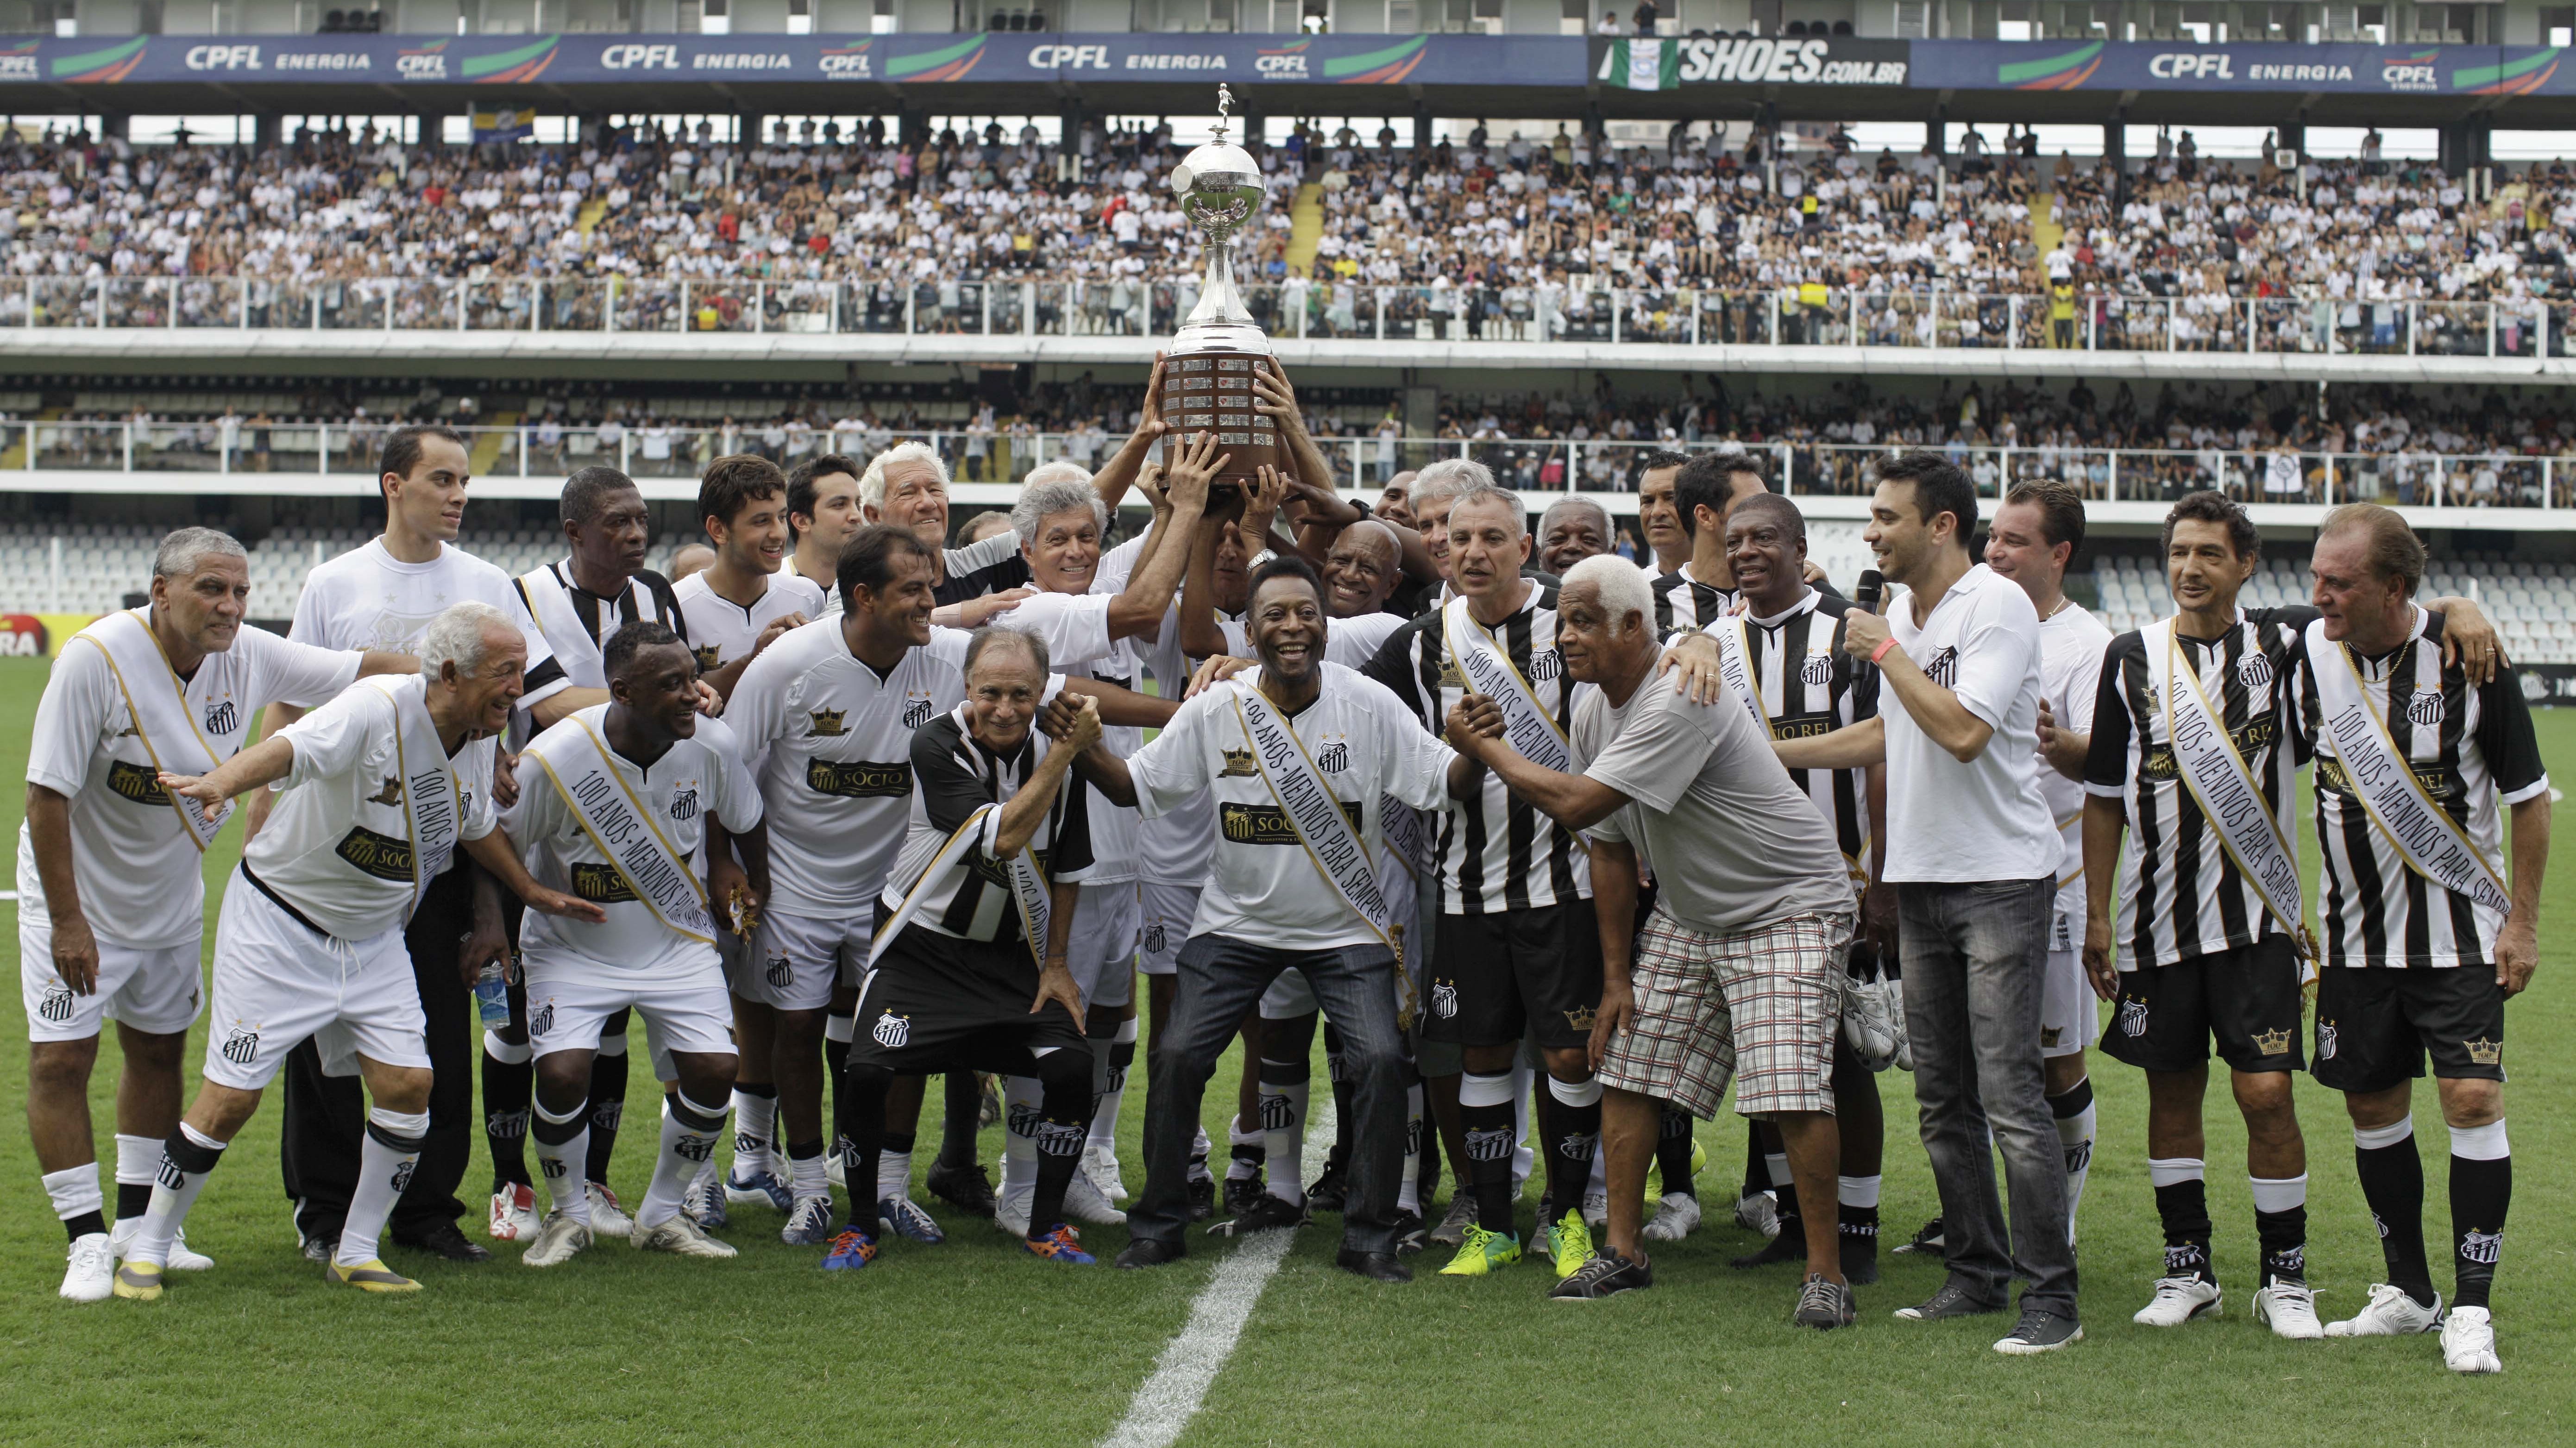 Santos FC and the Brazil national football team - Wikipedia